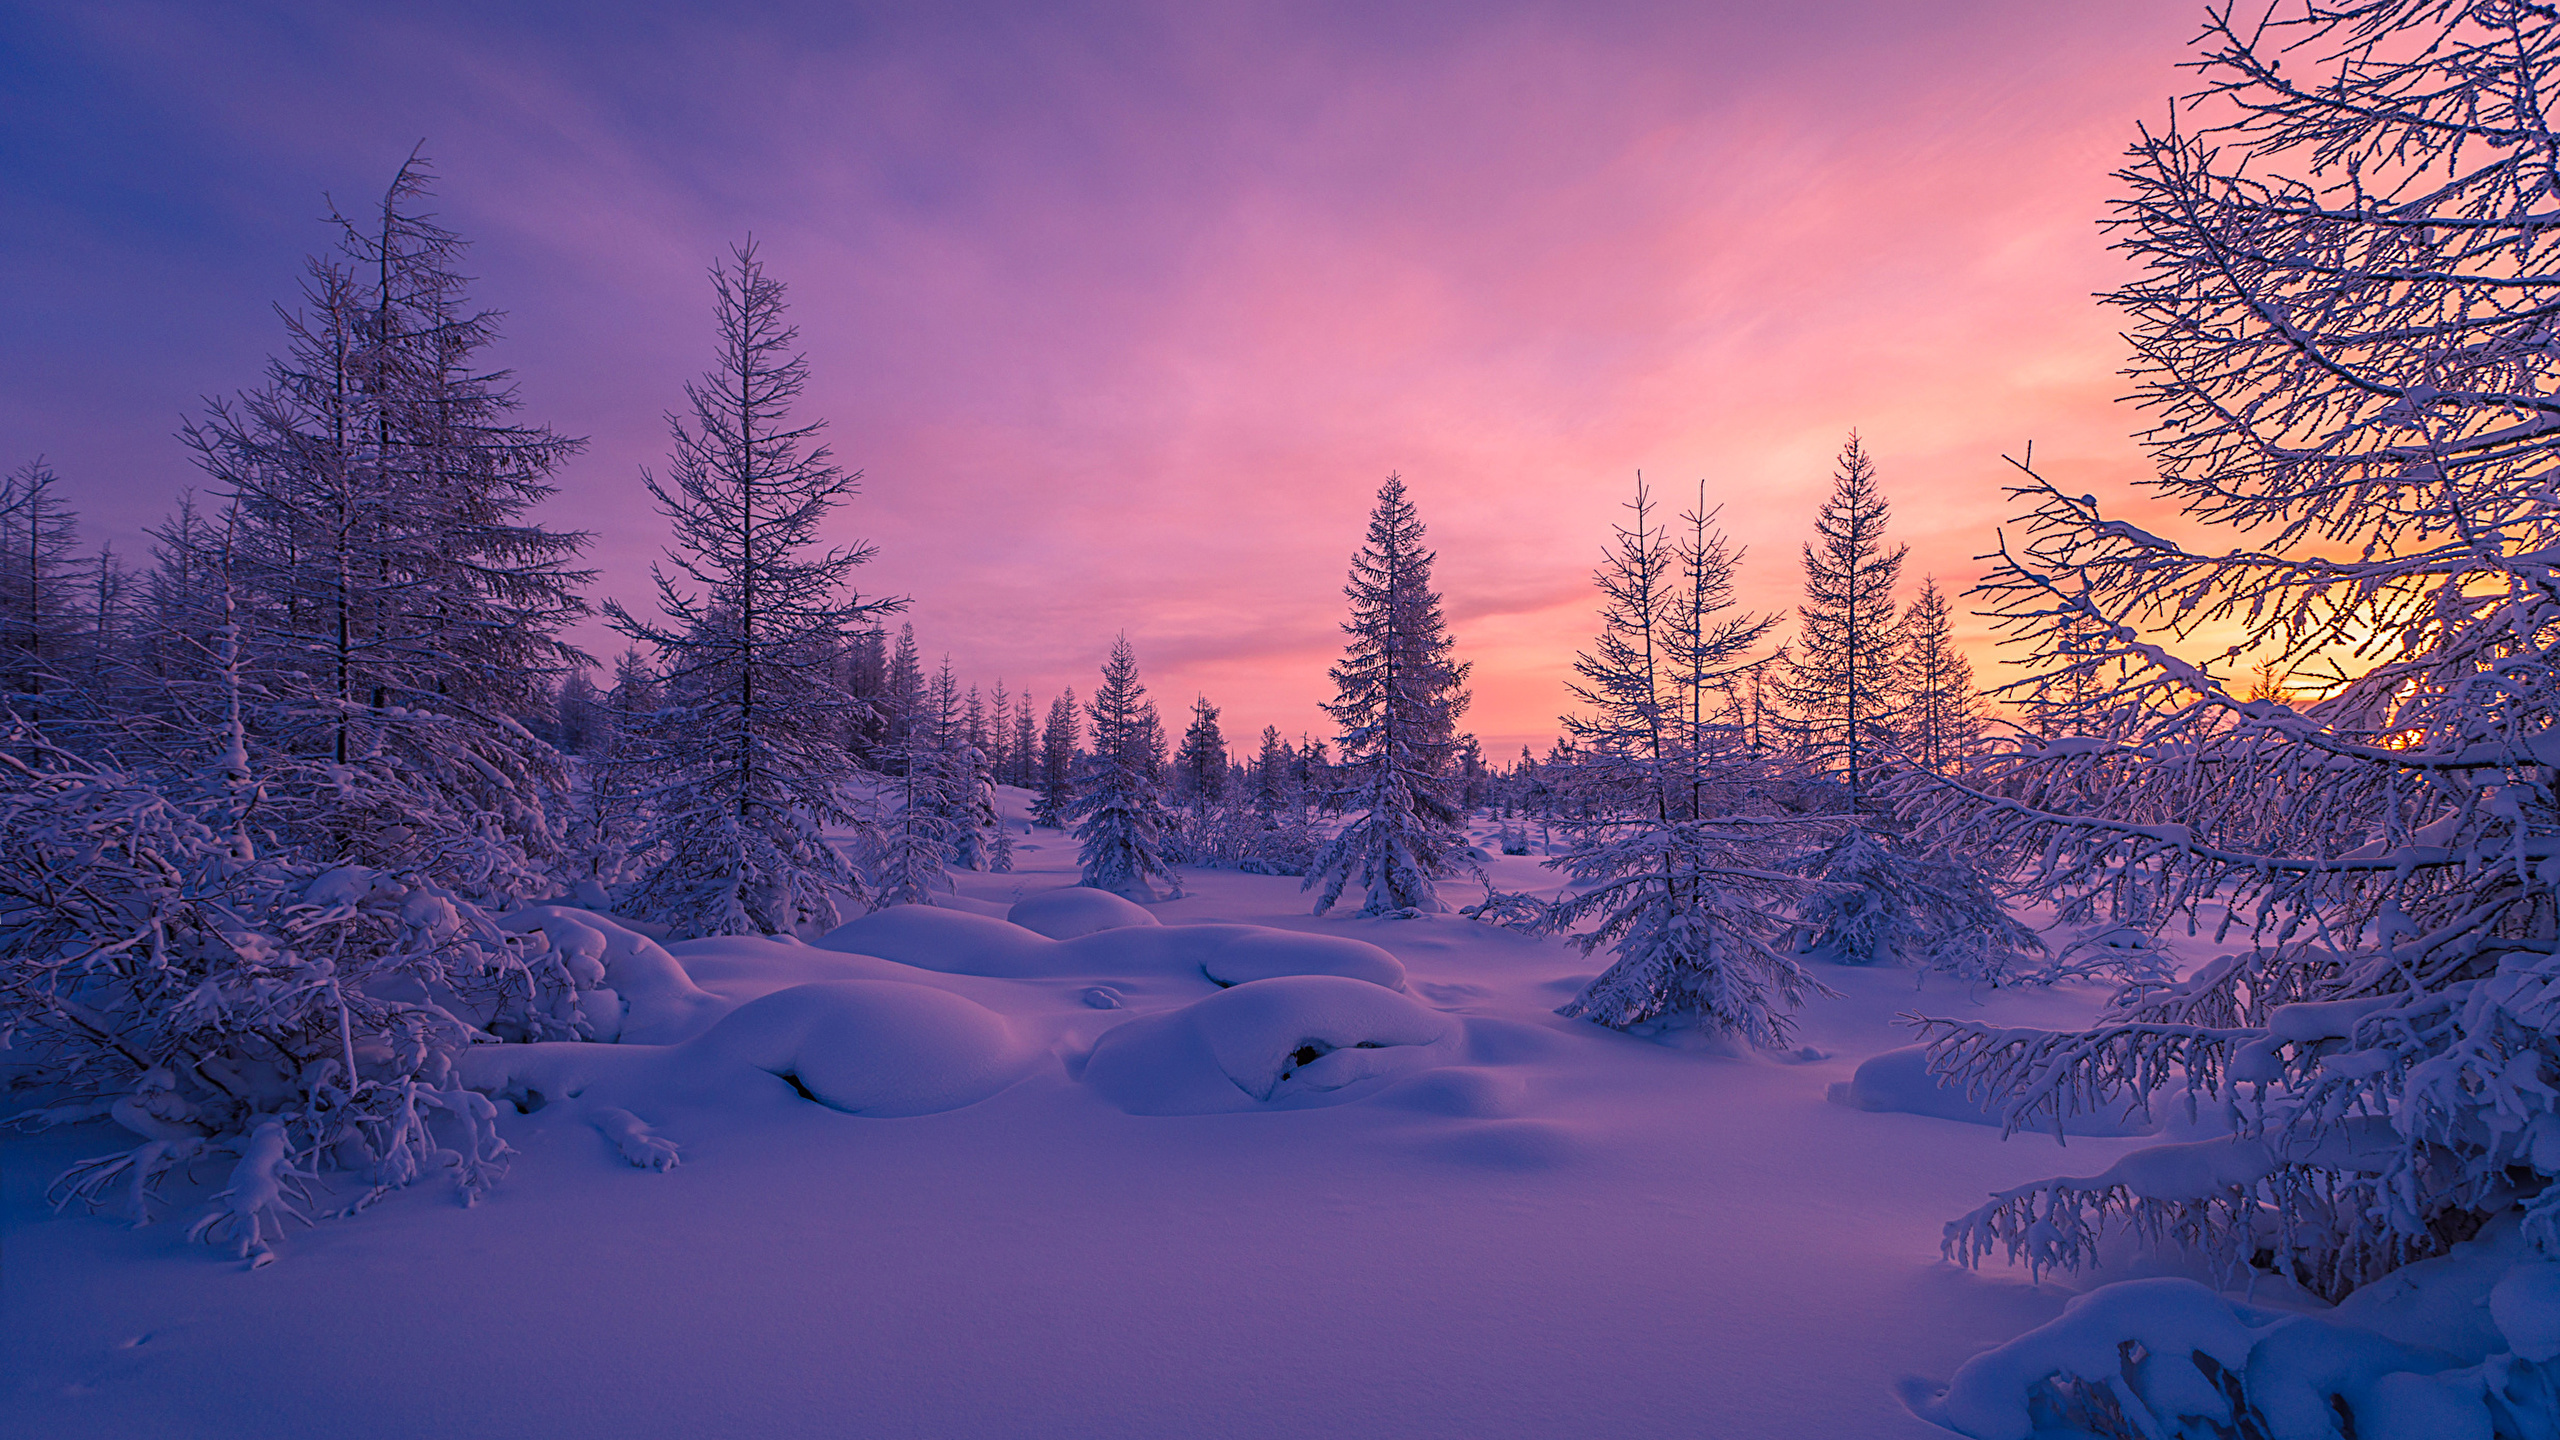 Snow Covered Trees During Daytime. Wallpaper in 2560x1440 Resolution